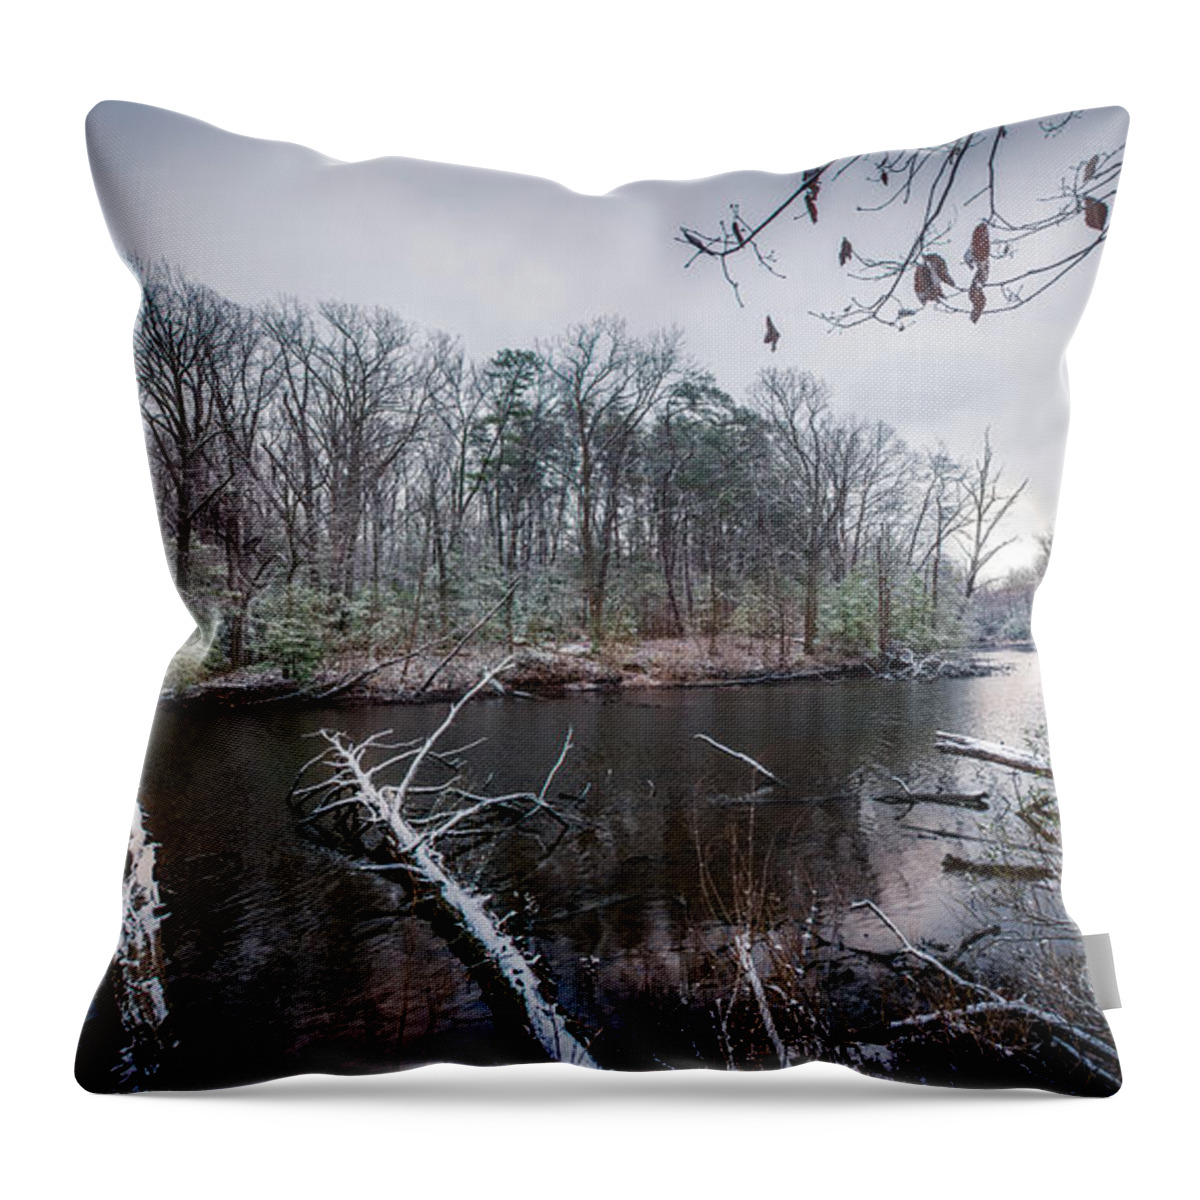 Swans Throw Pillow featuring the photograph Winter Swans by Patrick Wolf